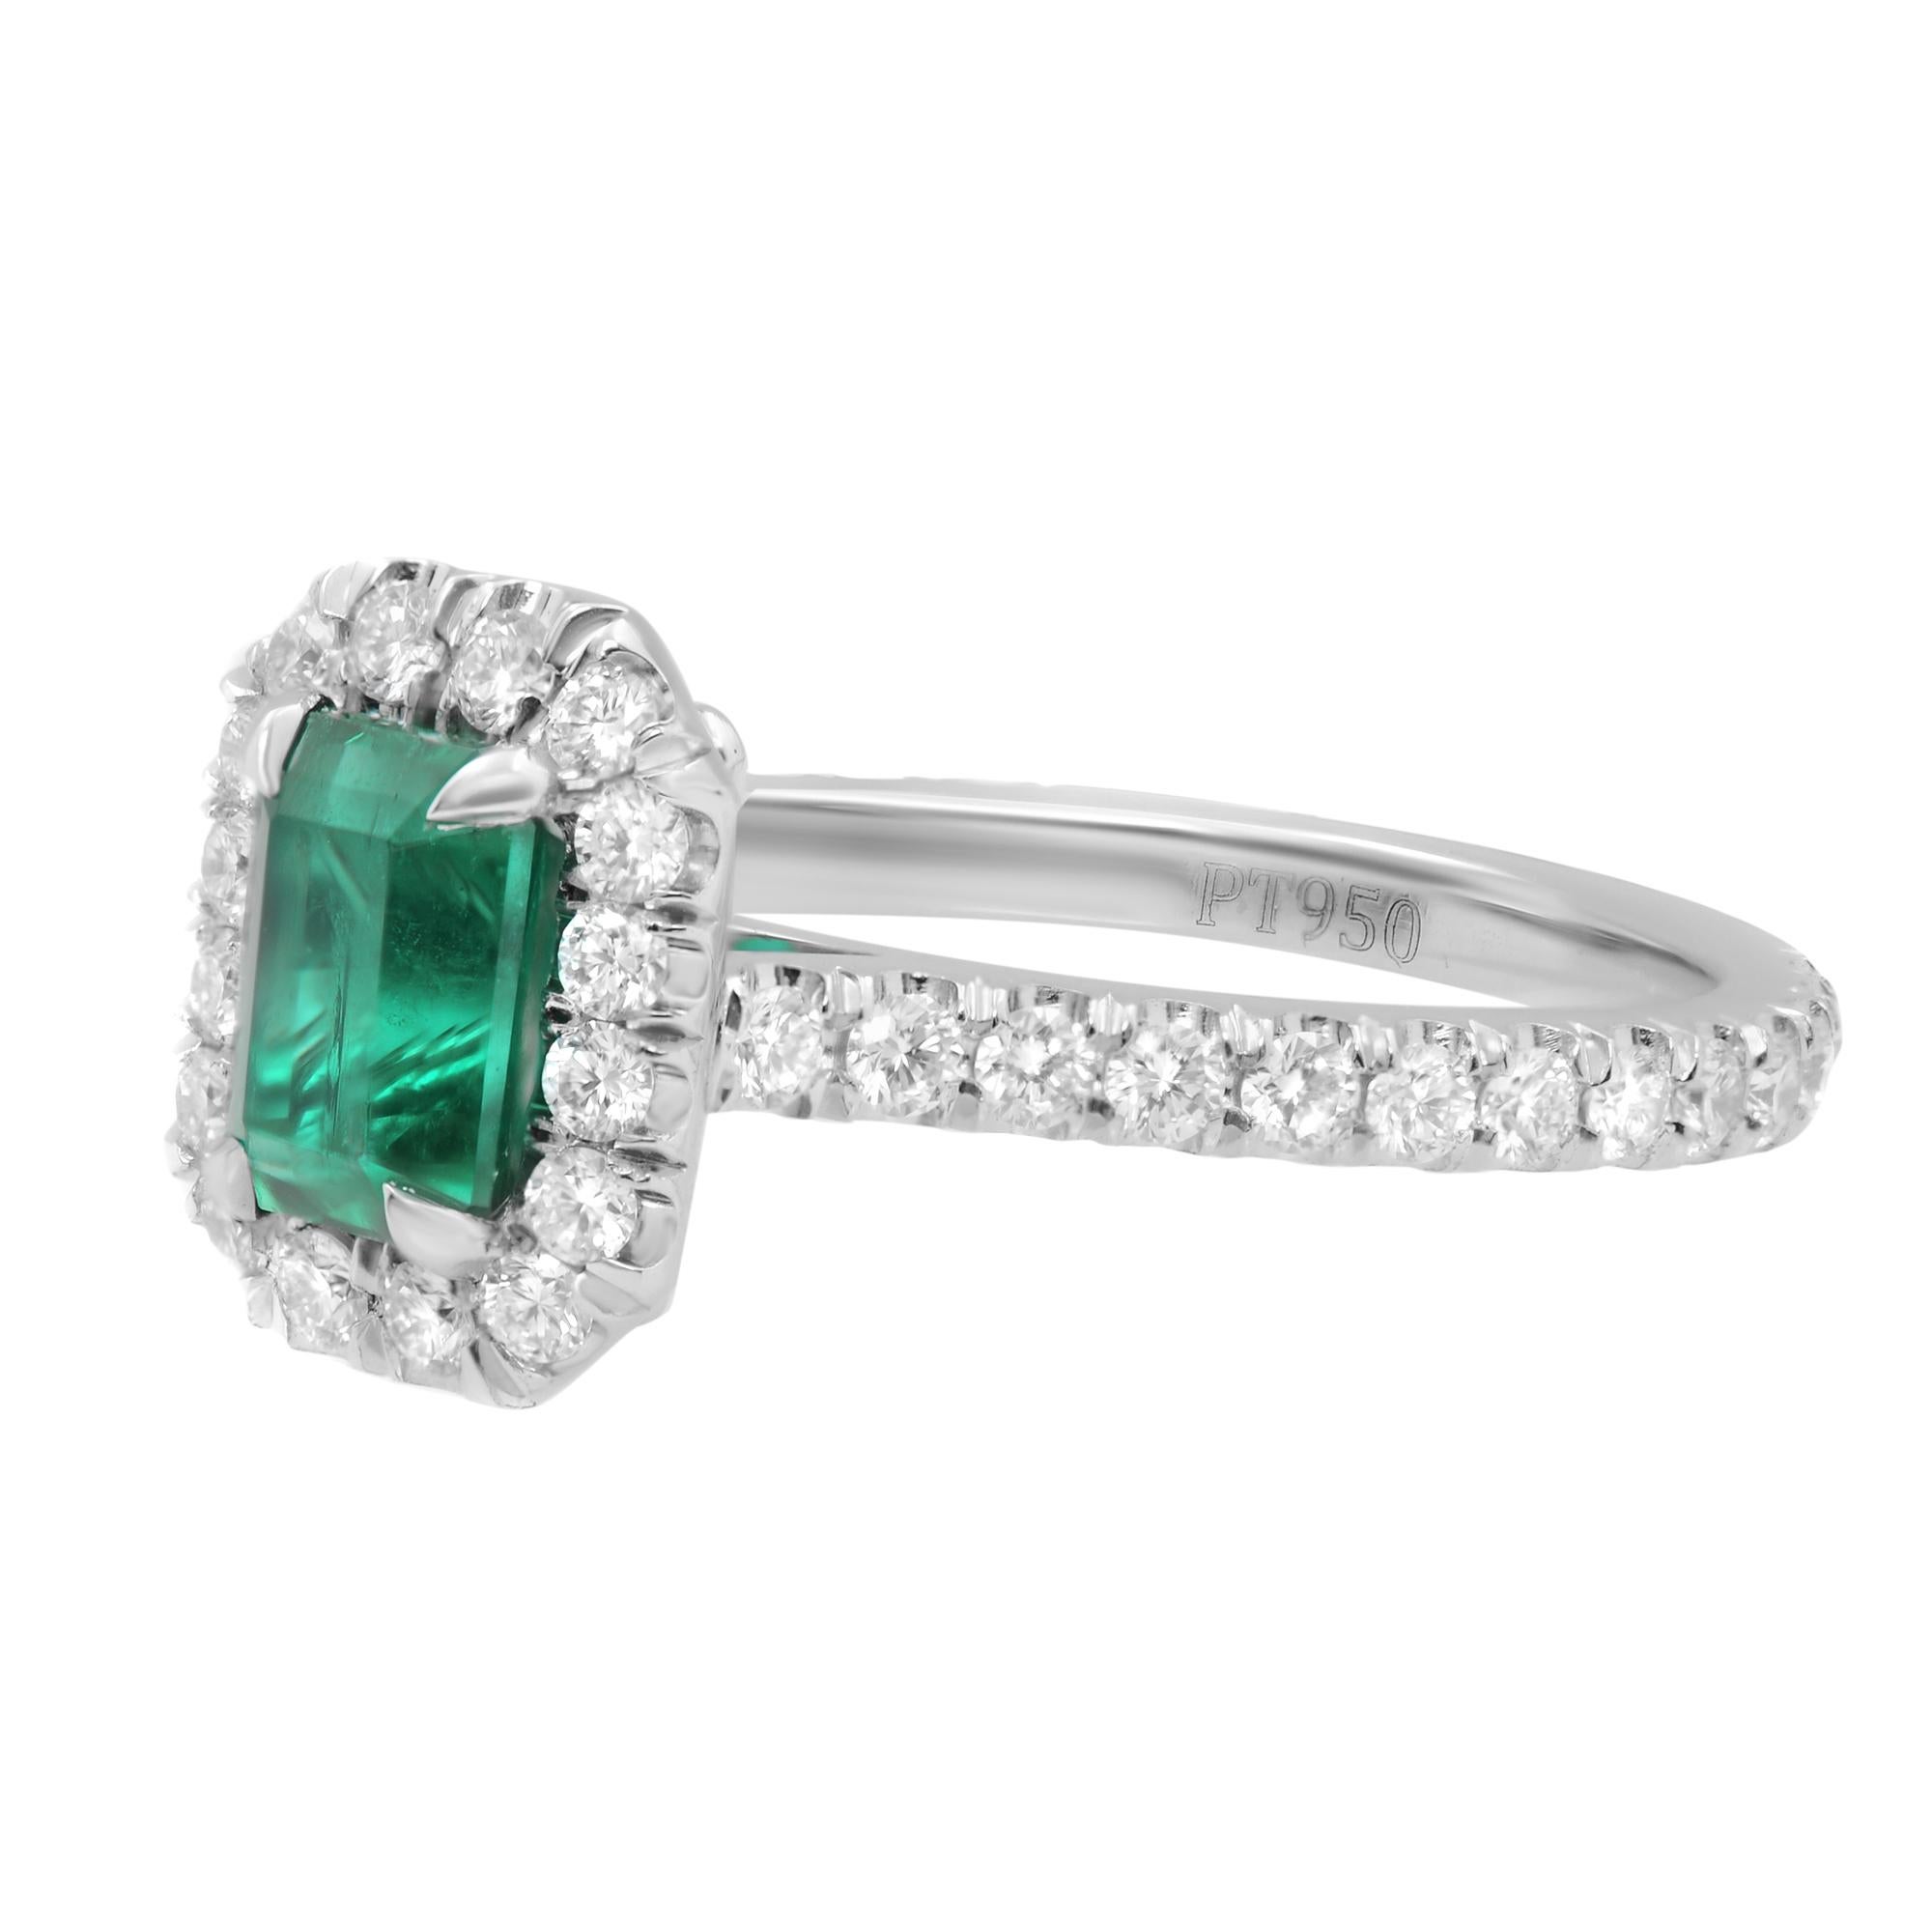 Emerald Cut Colombian Vivid Green 0.90cts Emerald Diamond Halo Engagement Ring Platinum For Sale